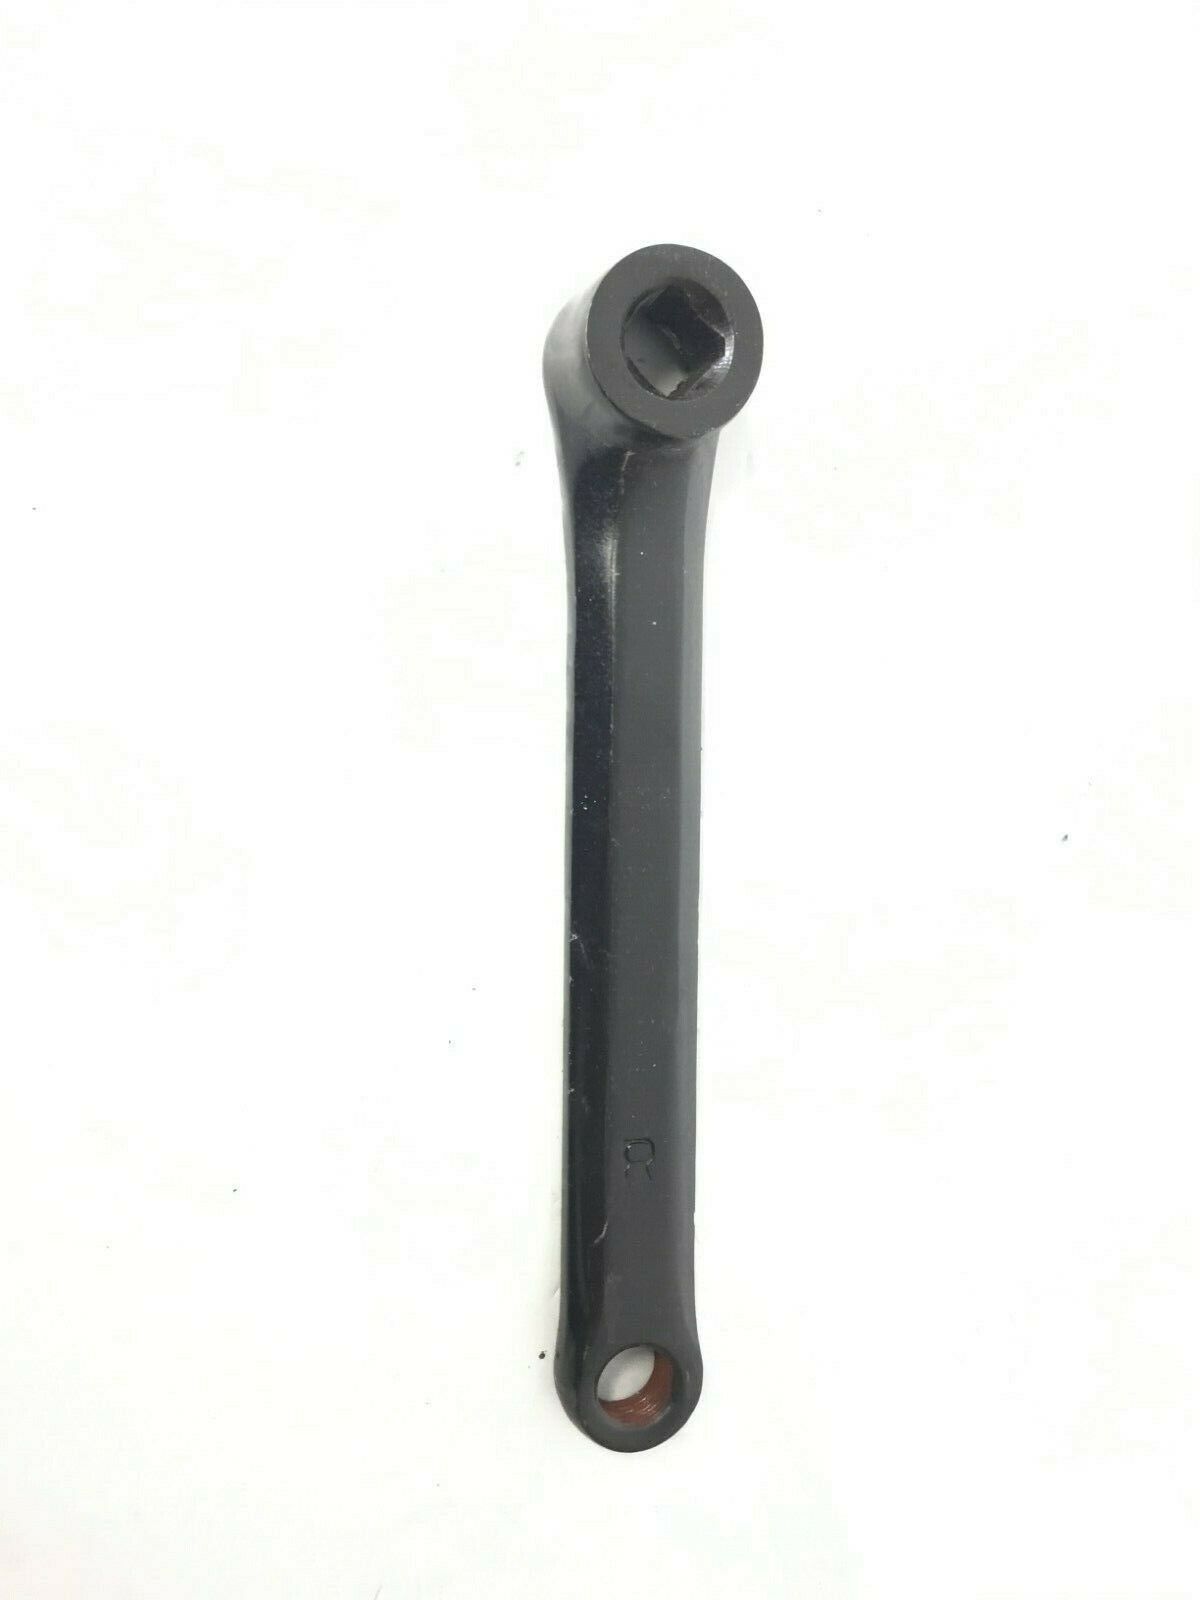 Right Pedal Crank Arm W/Nut & Washer